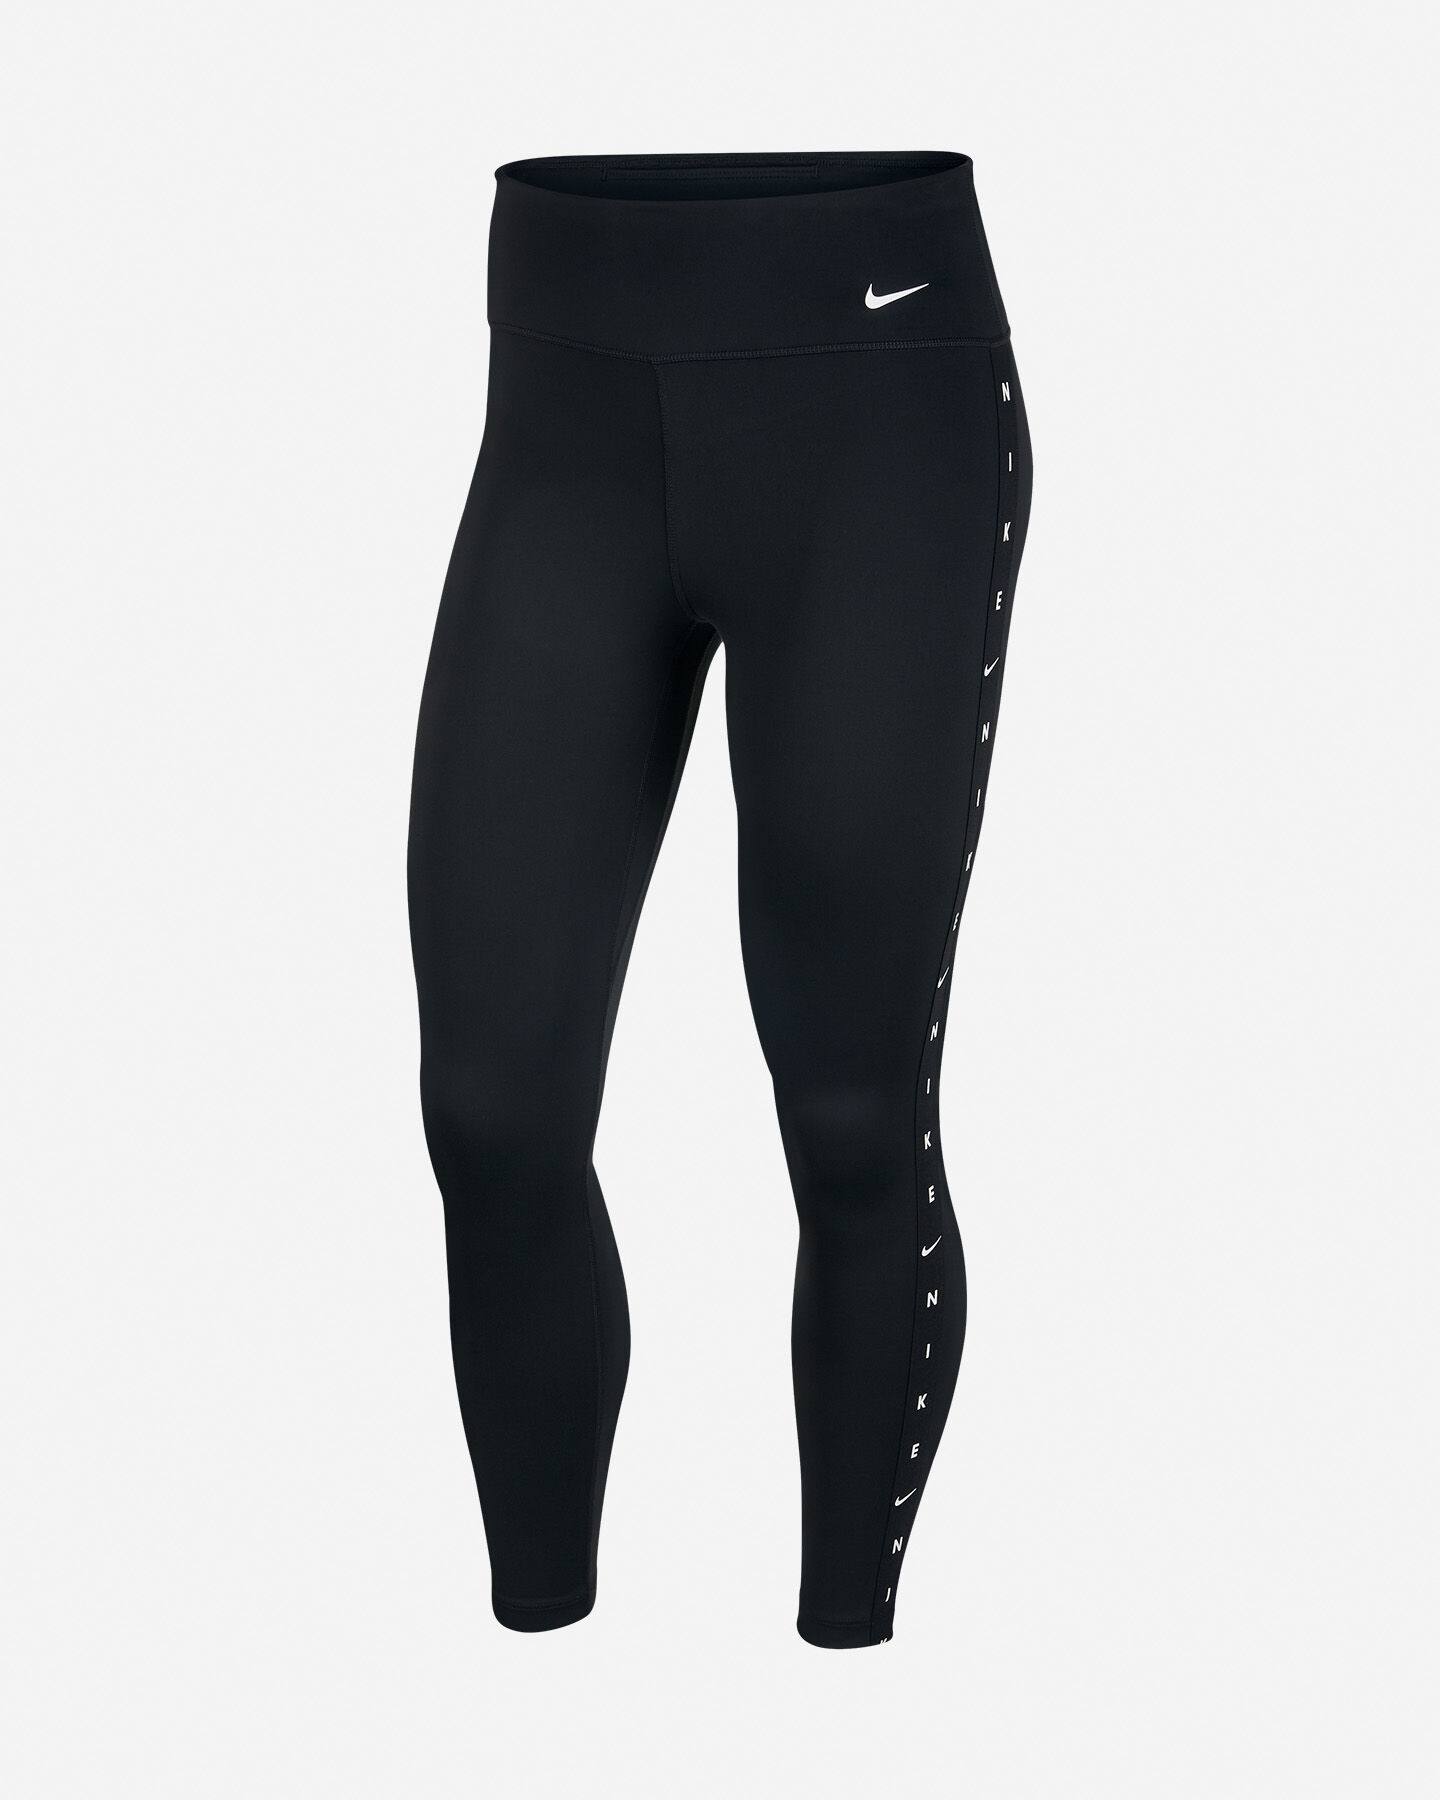  Leggings NIKE ONE W S5225570|010|XS scatto 0